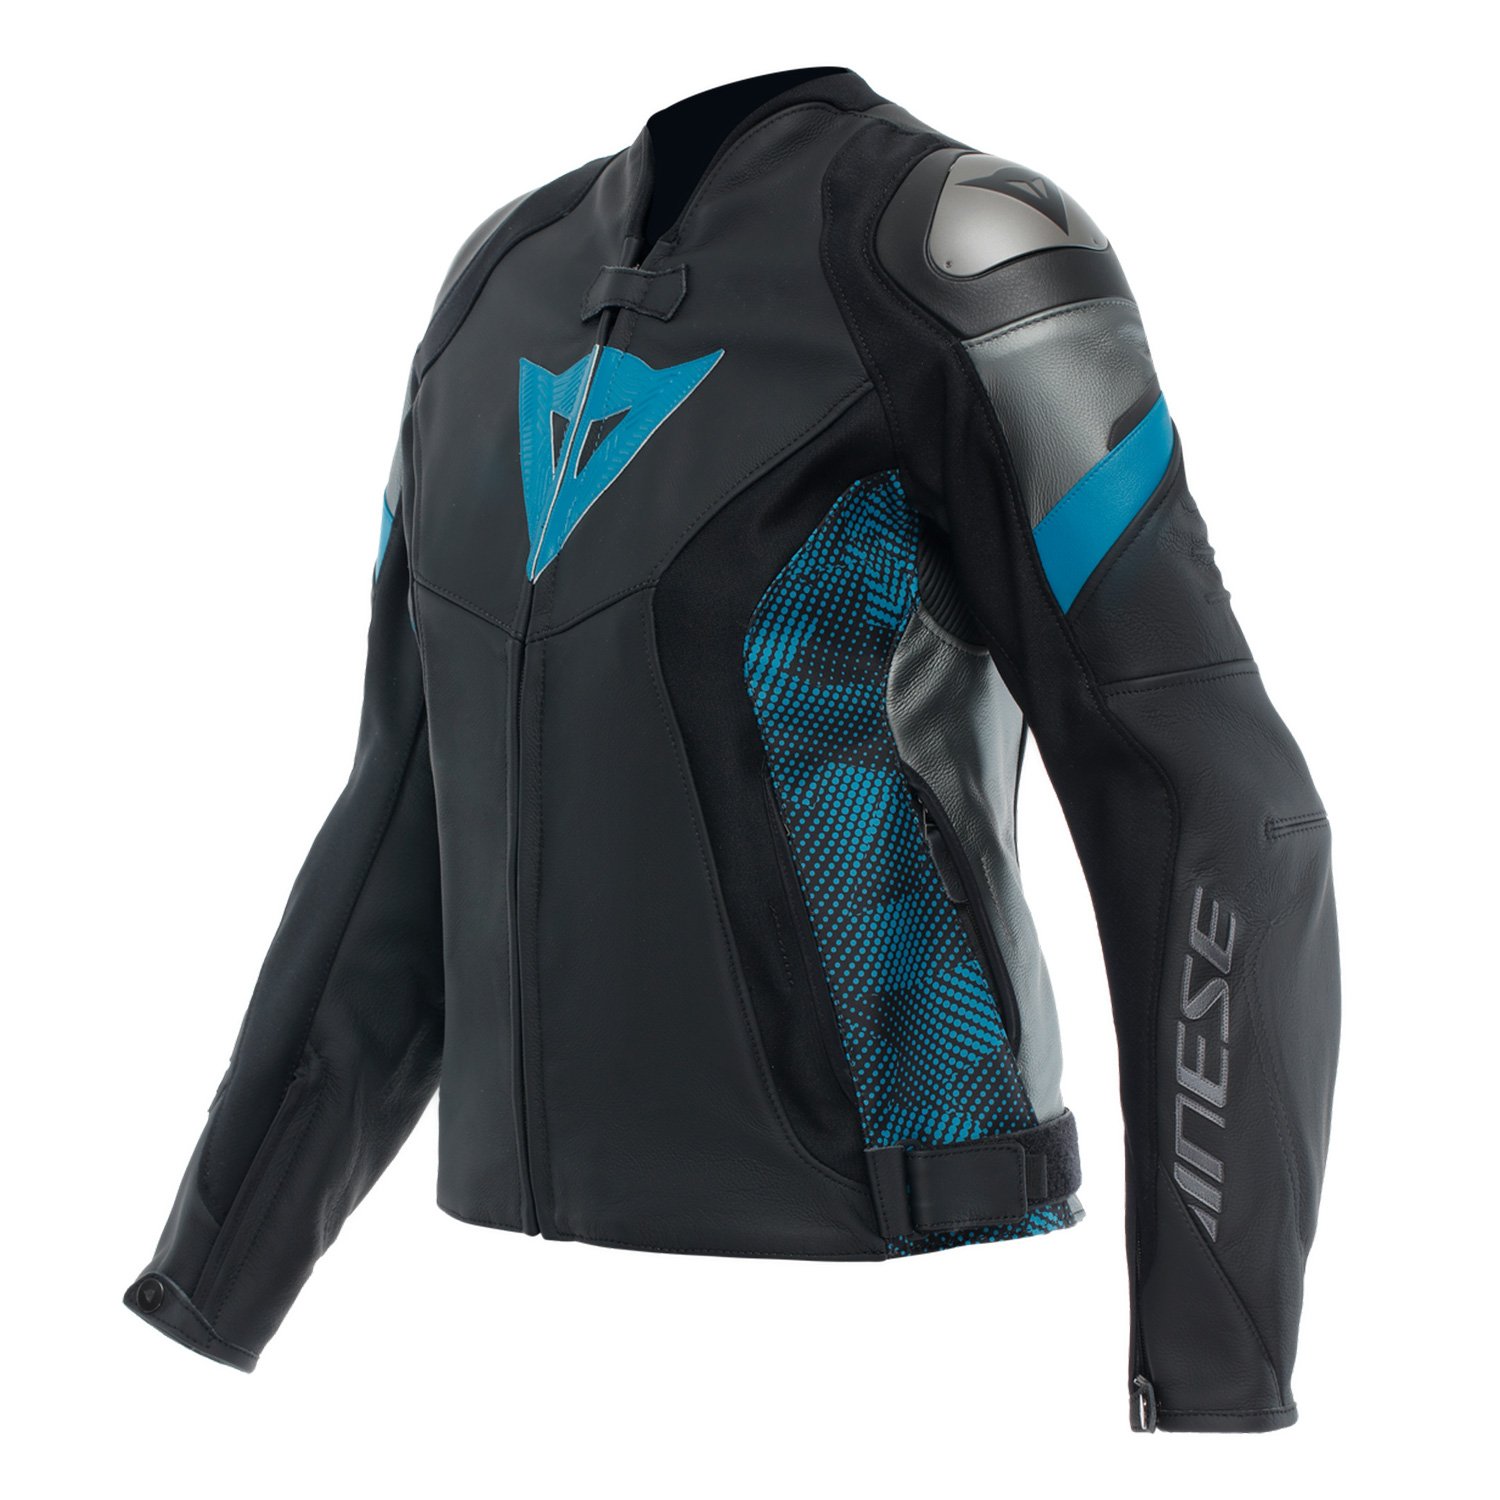 Image of Dainese Avro 5 Leather Jacket WMN Black Teal Anthracite Taille 44